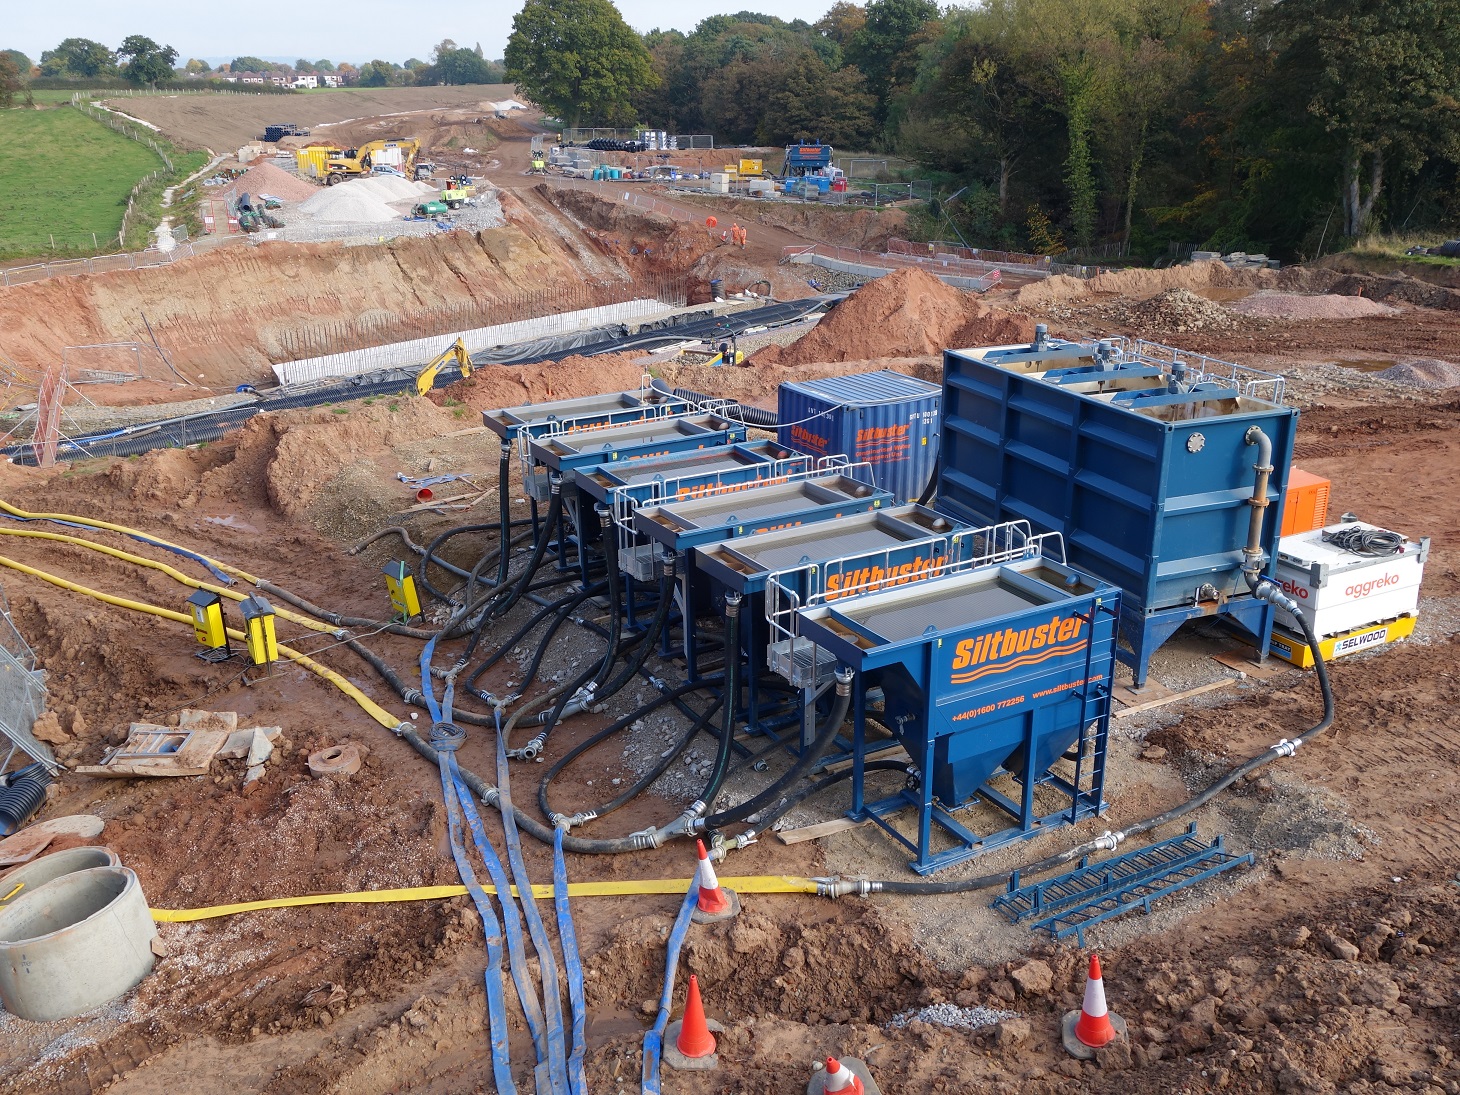 Siltbuster system for treating construction water run-off